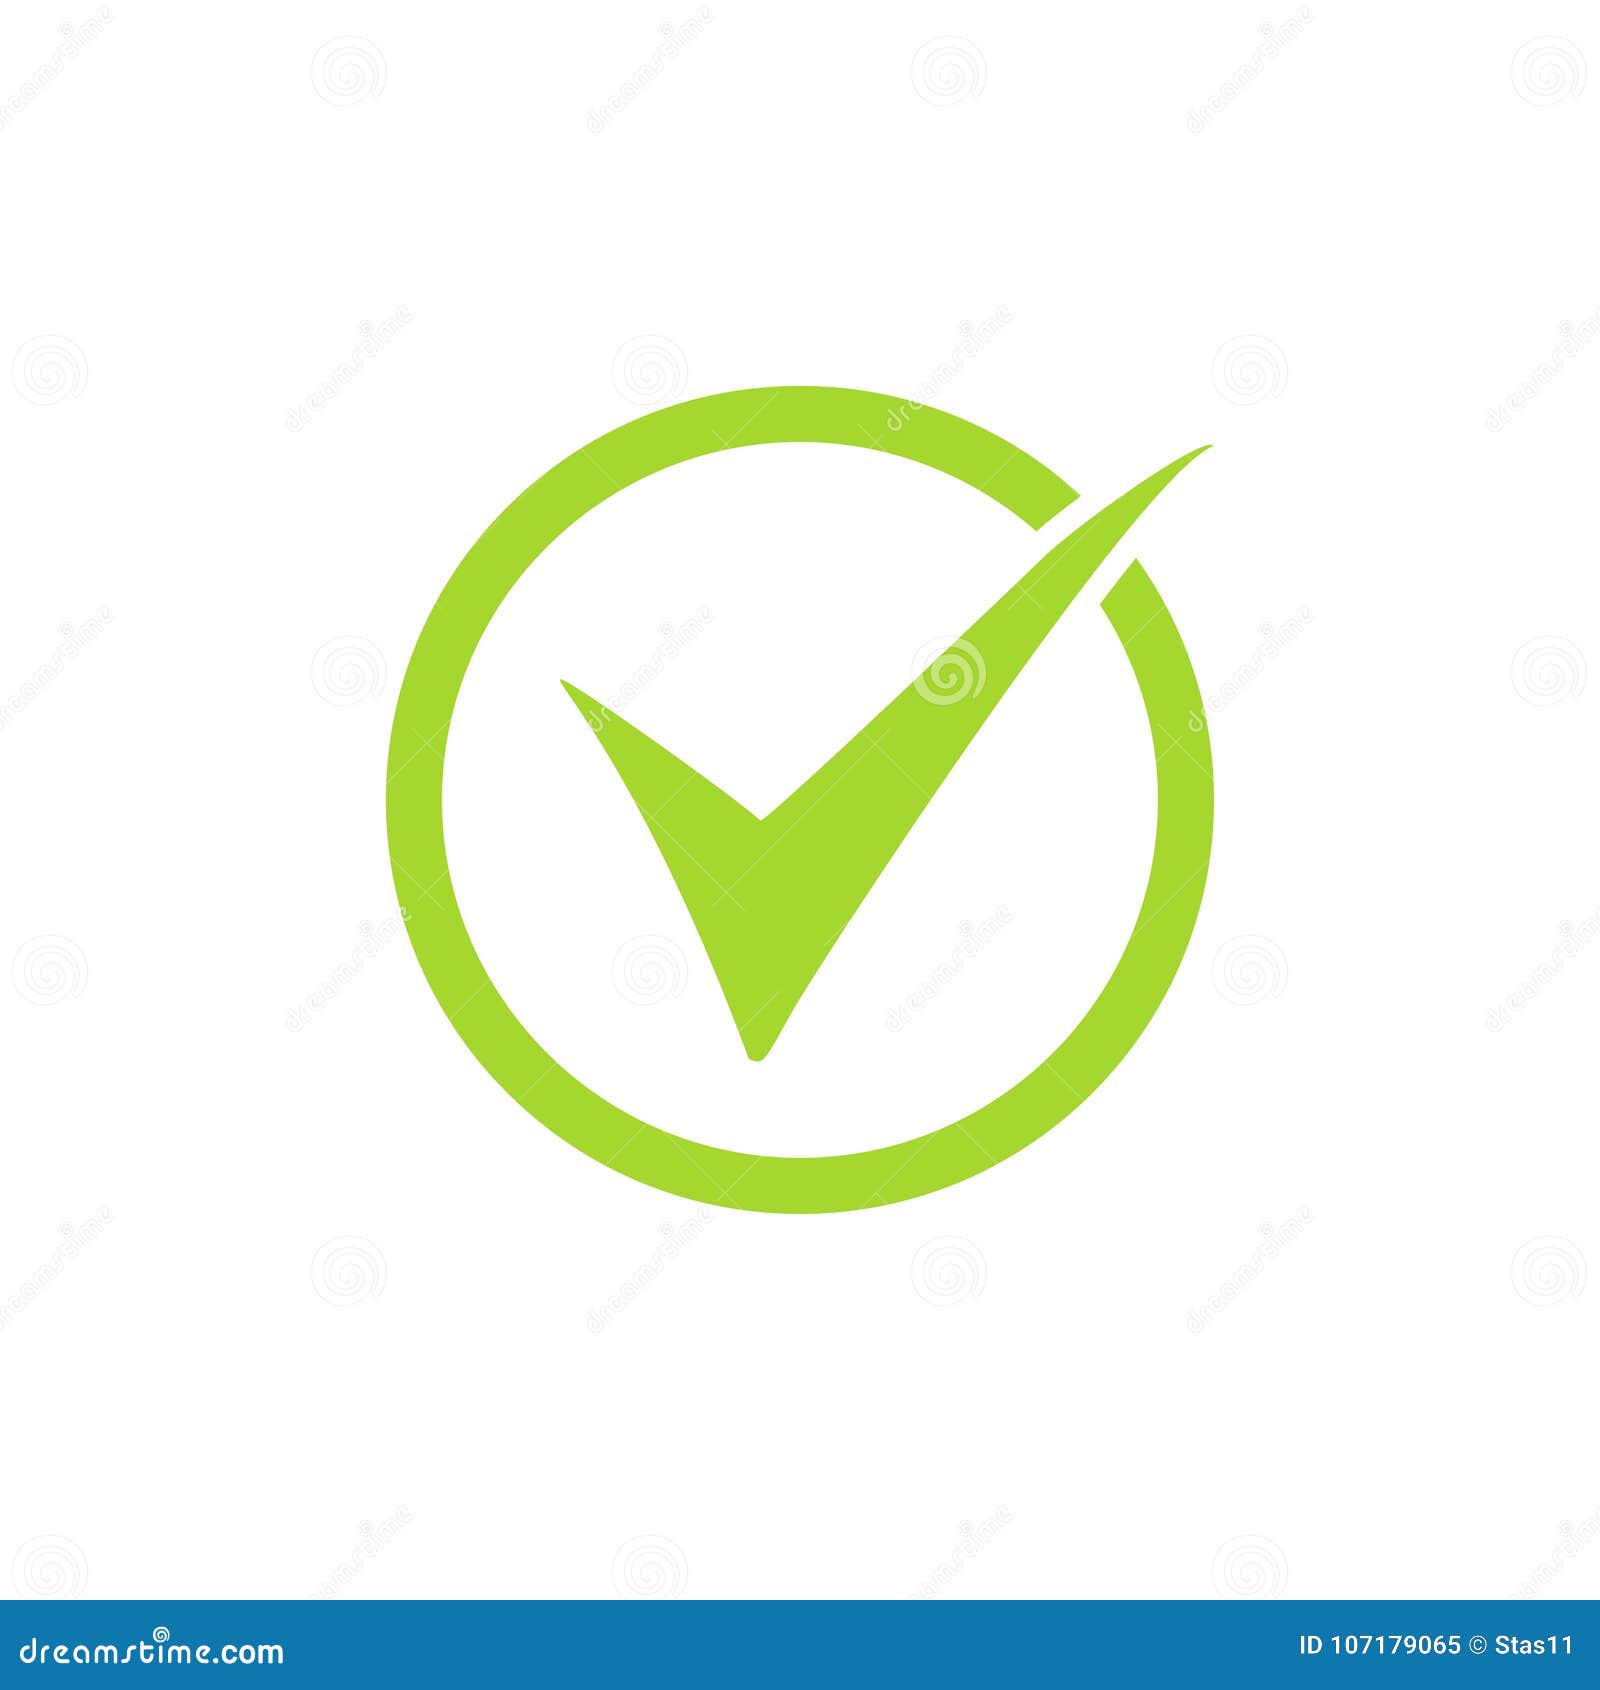 tick icon  , green checkmark  on white background, checked icon or correct choice sign, check mark or checkbox